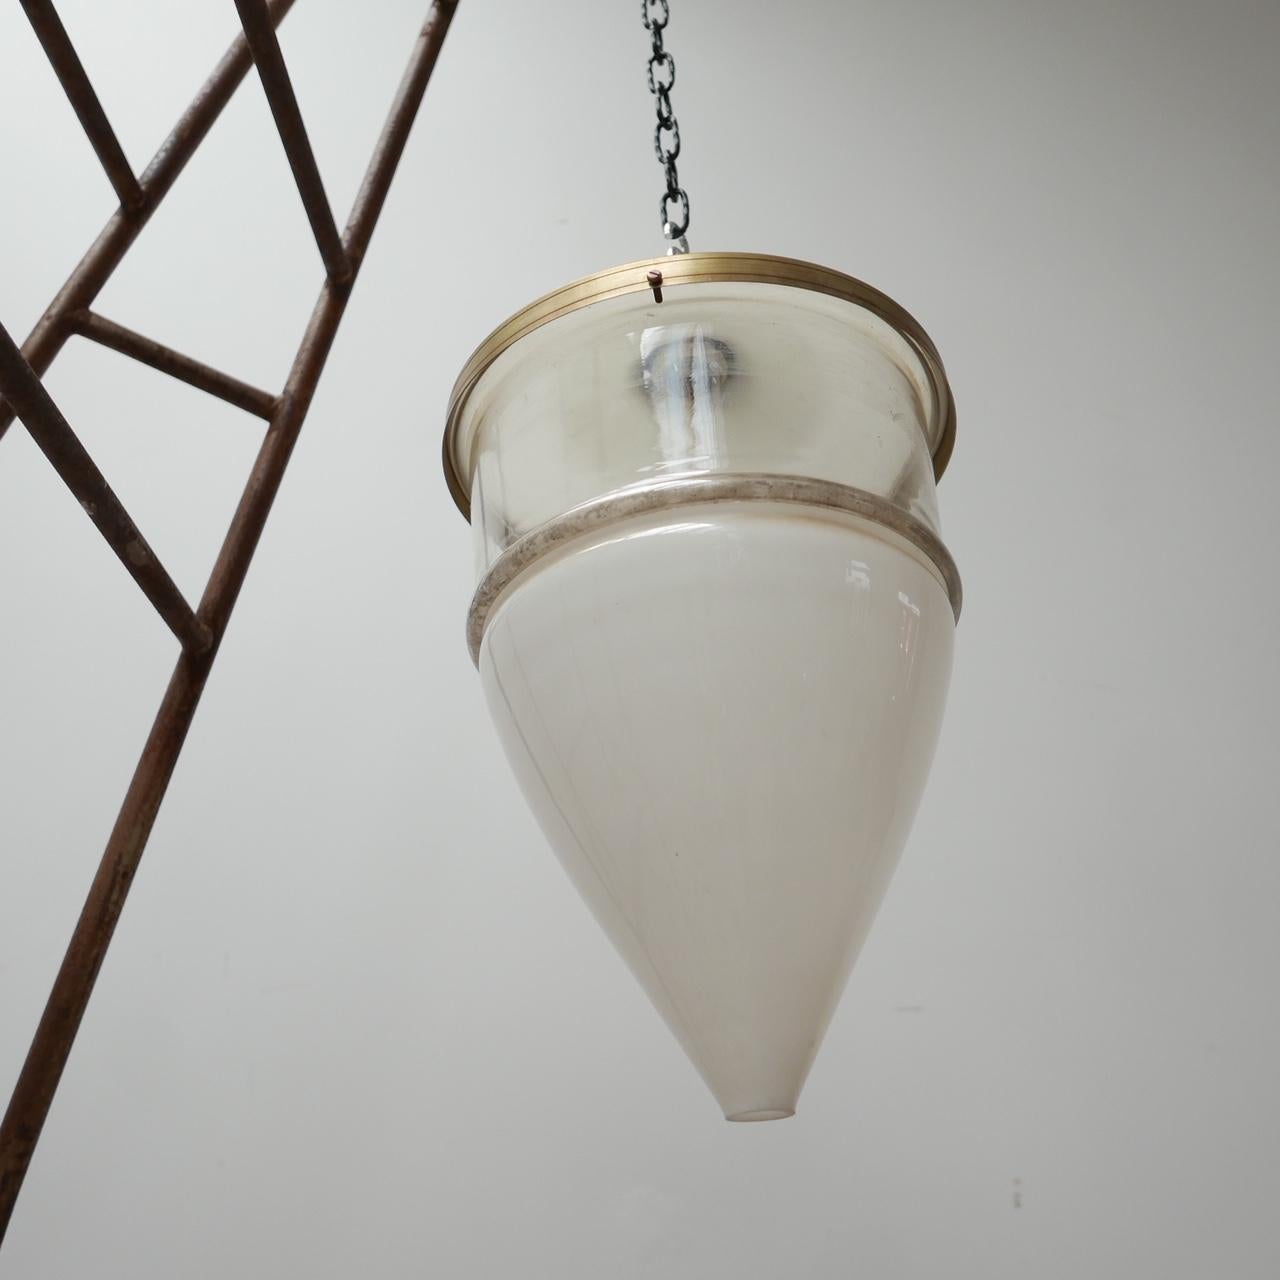 A large antique pendant light. 

Stamped Jena. 

German, c1910. 

Highly unusual and rare lamp, the two base parts of the lamp are pressed glass over the rim rather than using a metal rim which is the normal way of attaching glass. 

The